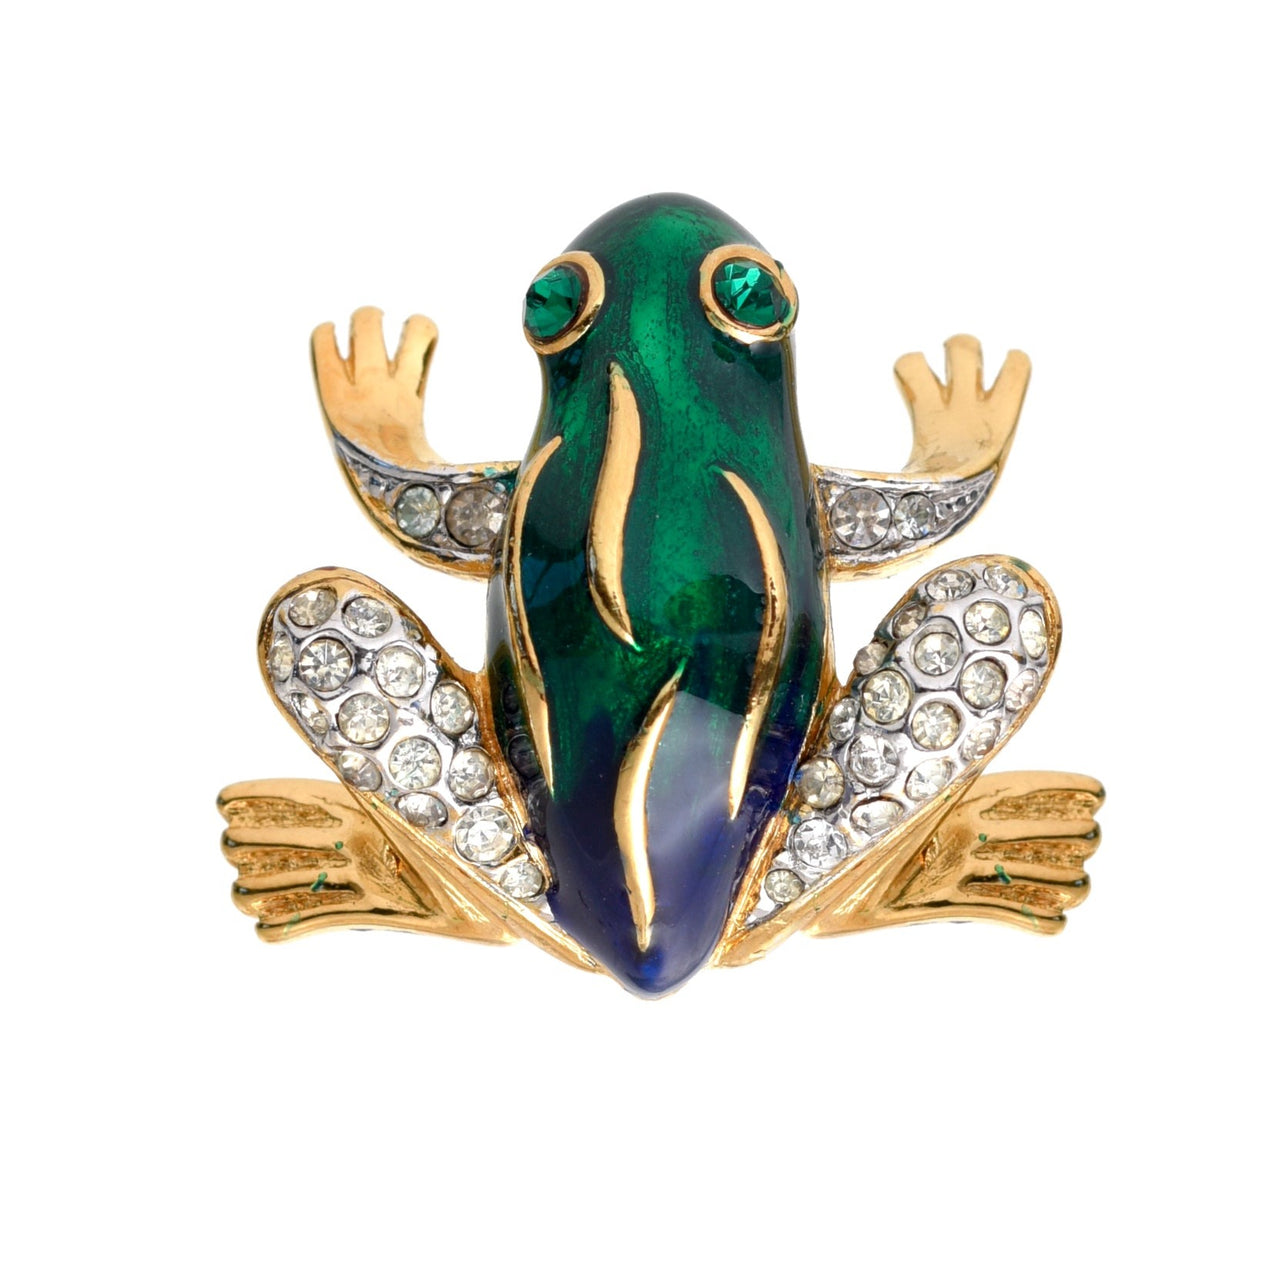 1990s Vintage Attwood And Sawyer Frog Brooch Eclectica Vintage Costume Jewellery